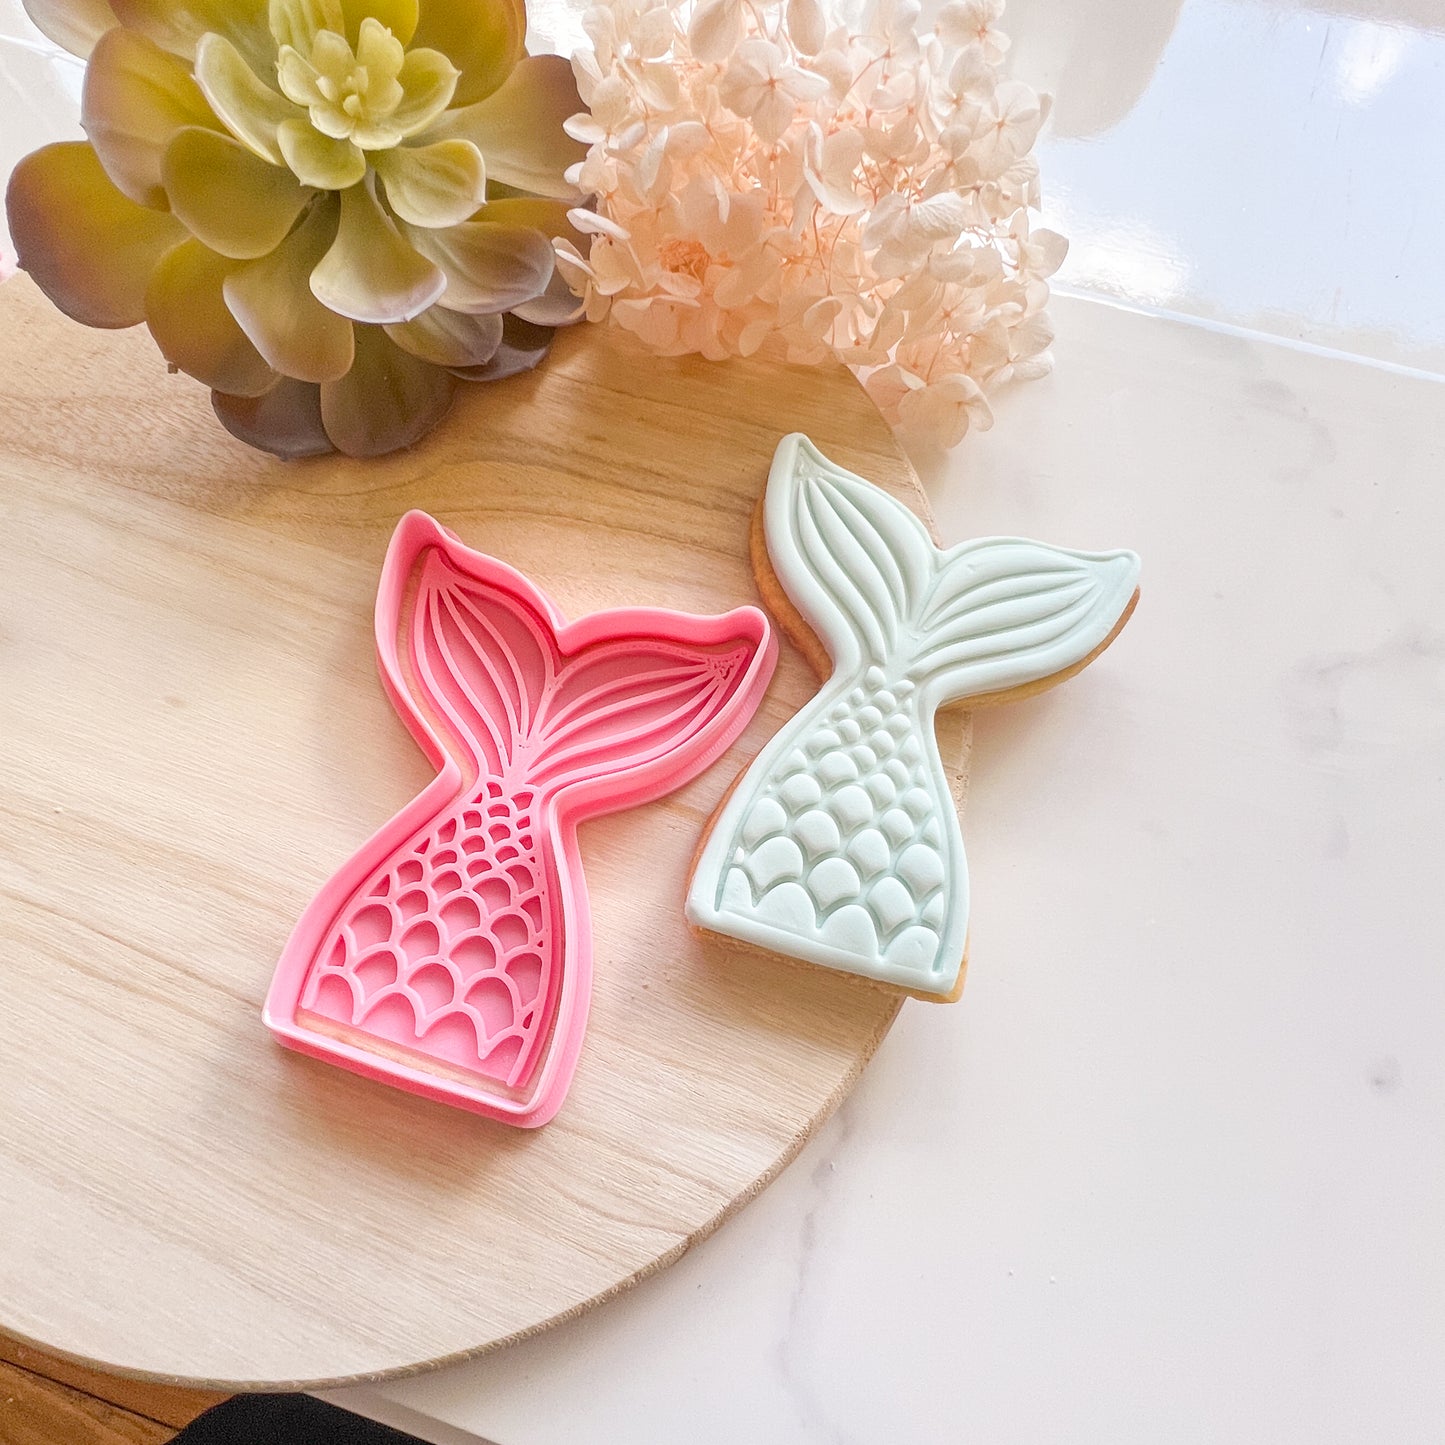 "Mermaid Tail" - Cookie Cutter & Stamp